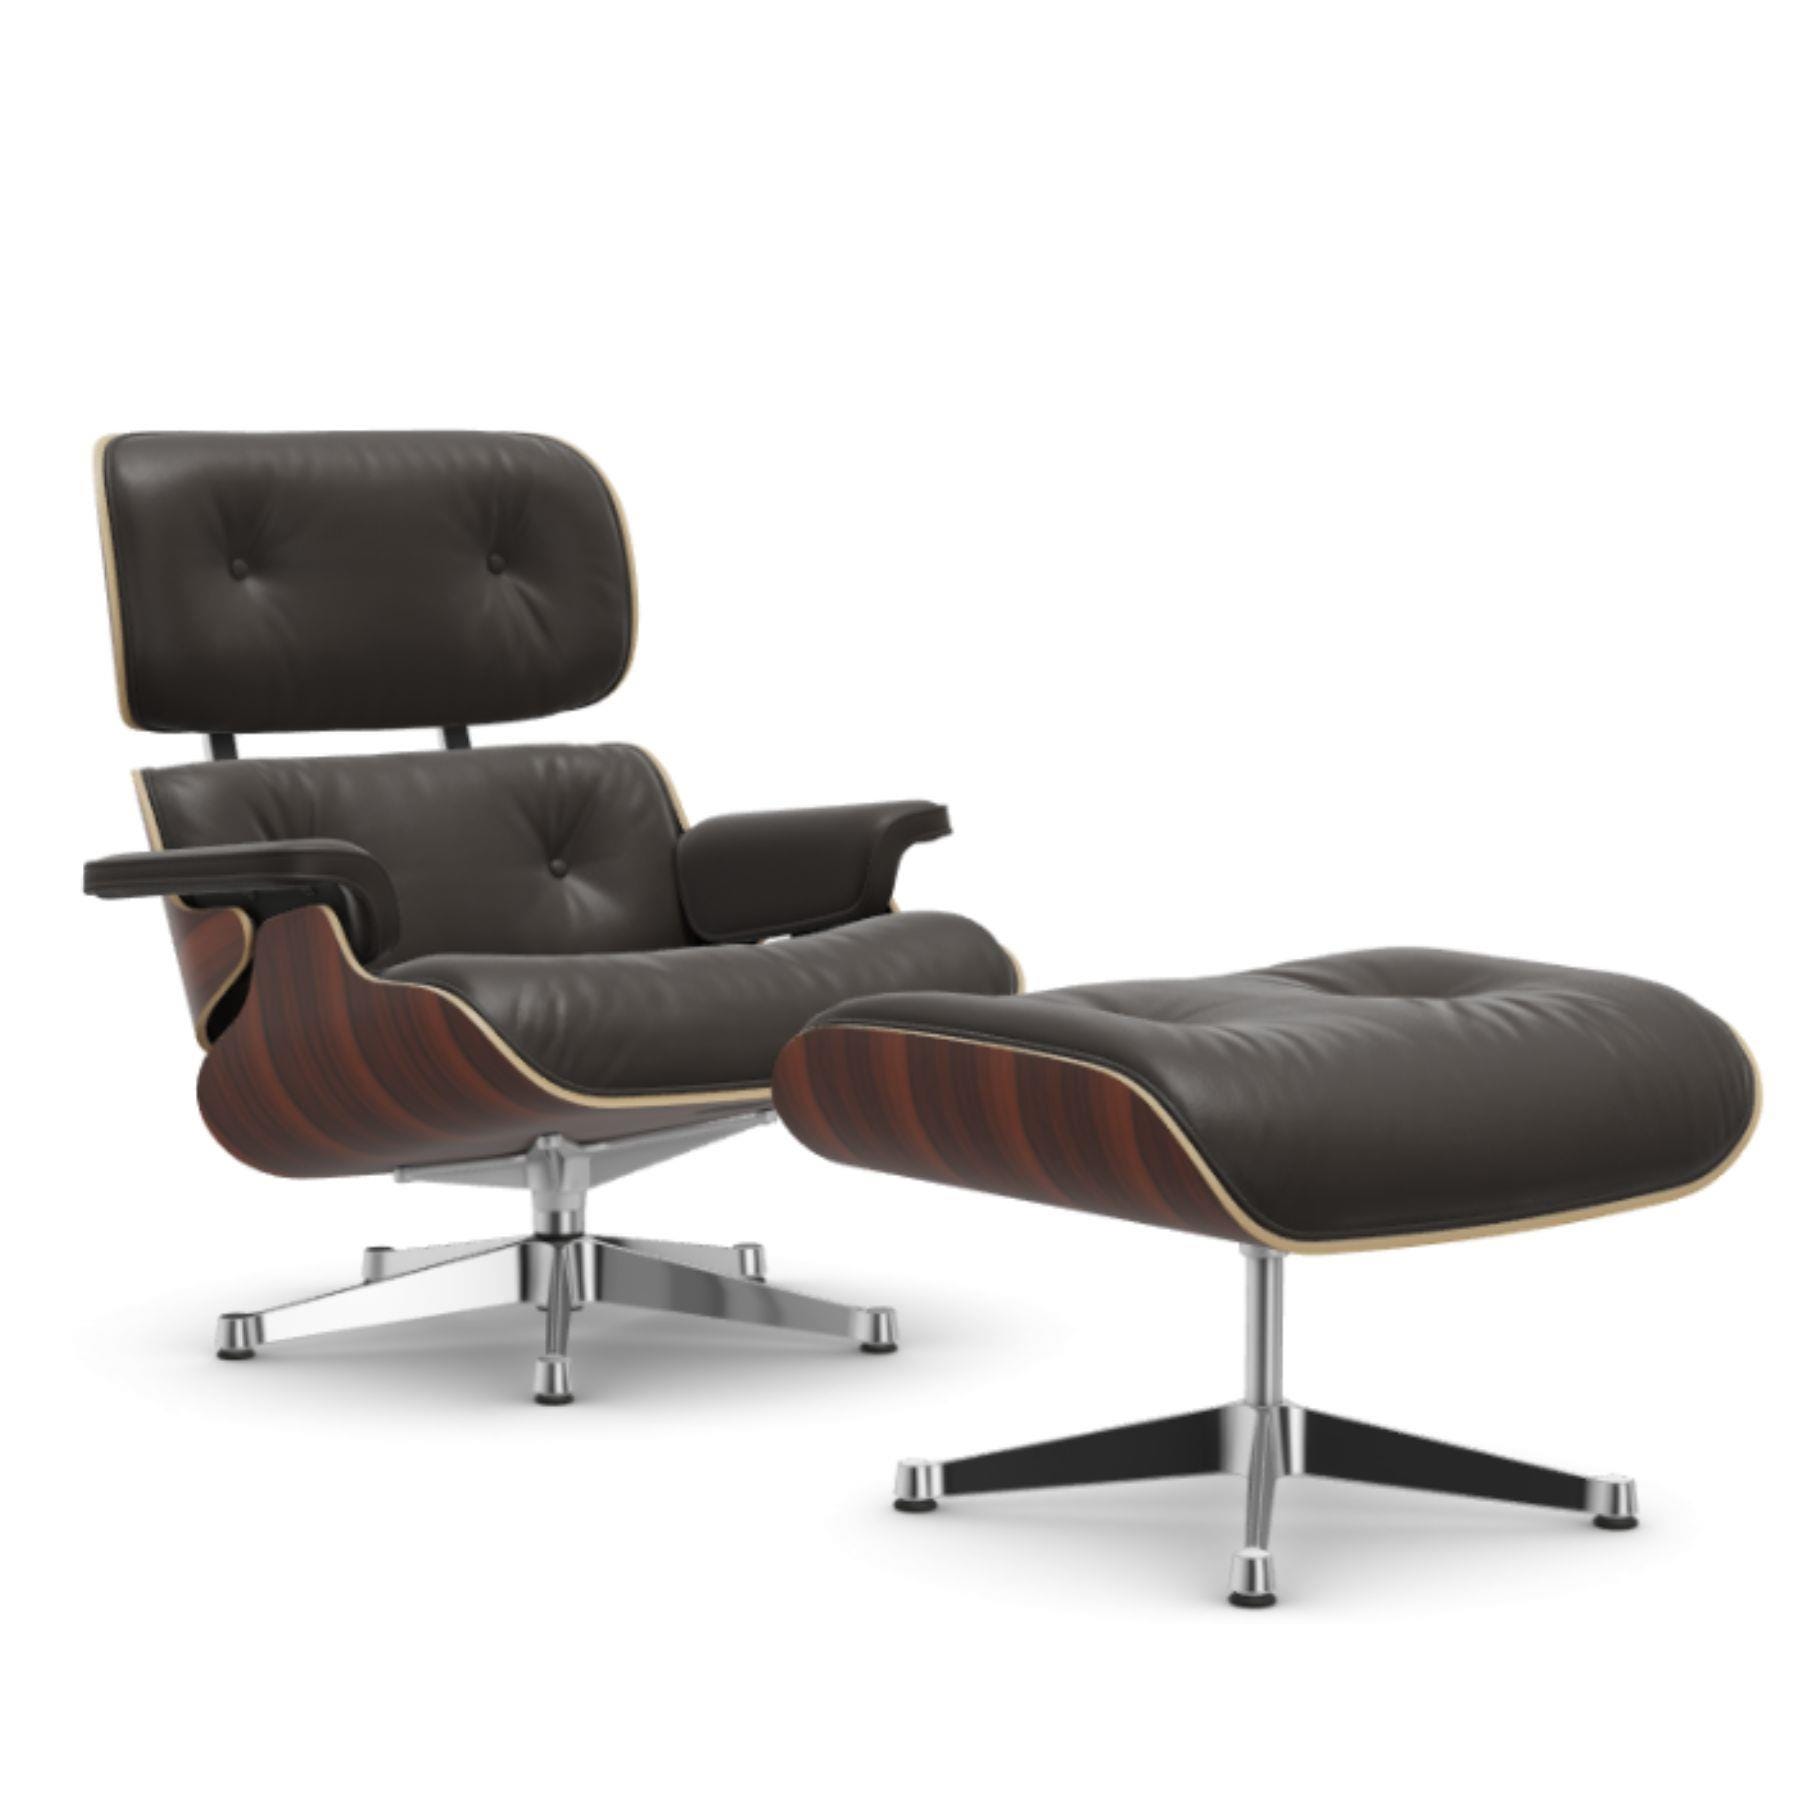 Vitra Eames Classic Lounge Chair Santos Palisander Leather Natural F Chocolate Polished Aluminium With Ottoman Light Wood Designer Furniture From